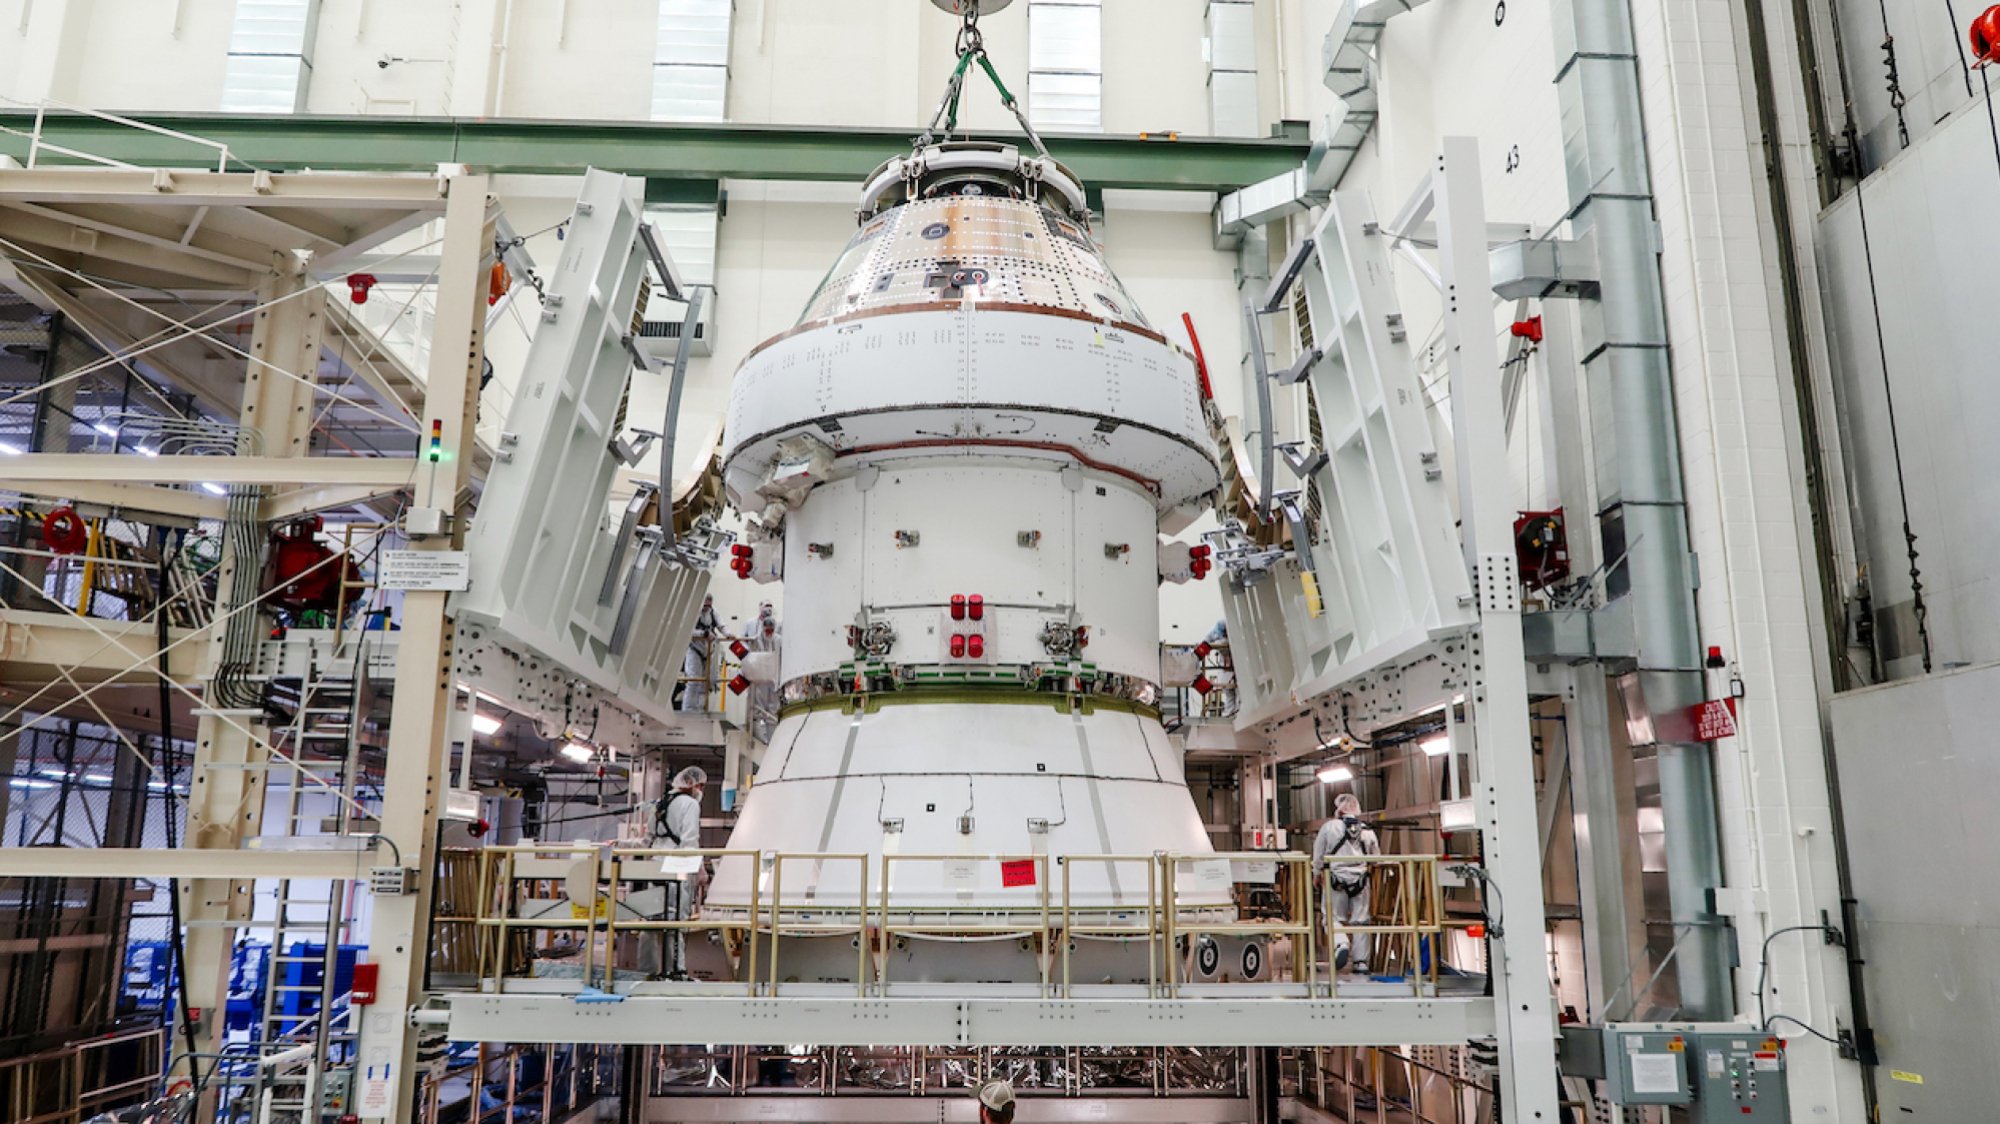 The stacked Orion vehicle. At bottom are engineers, for size reference.